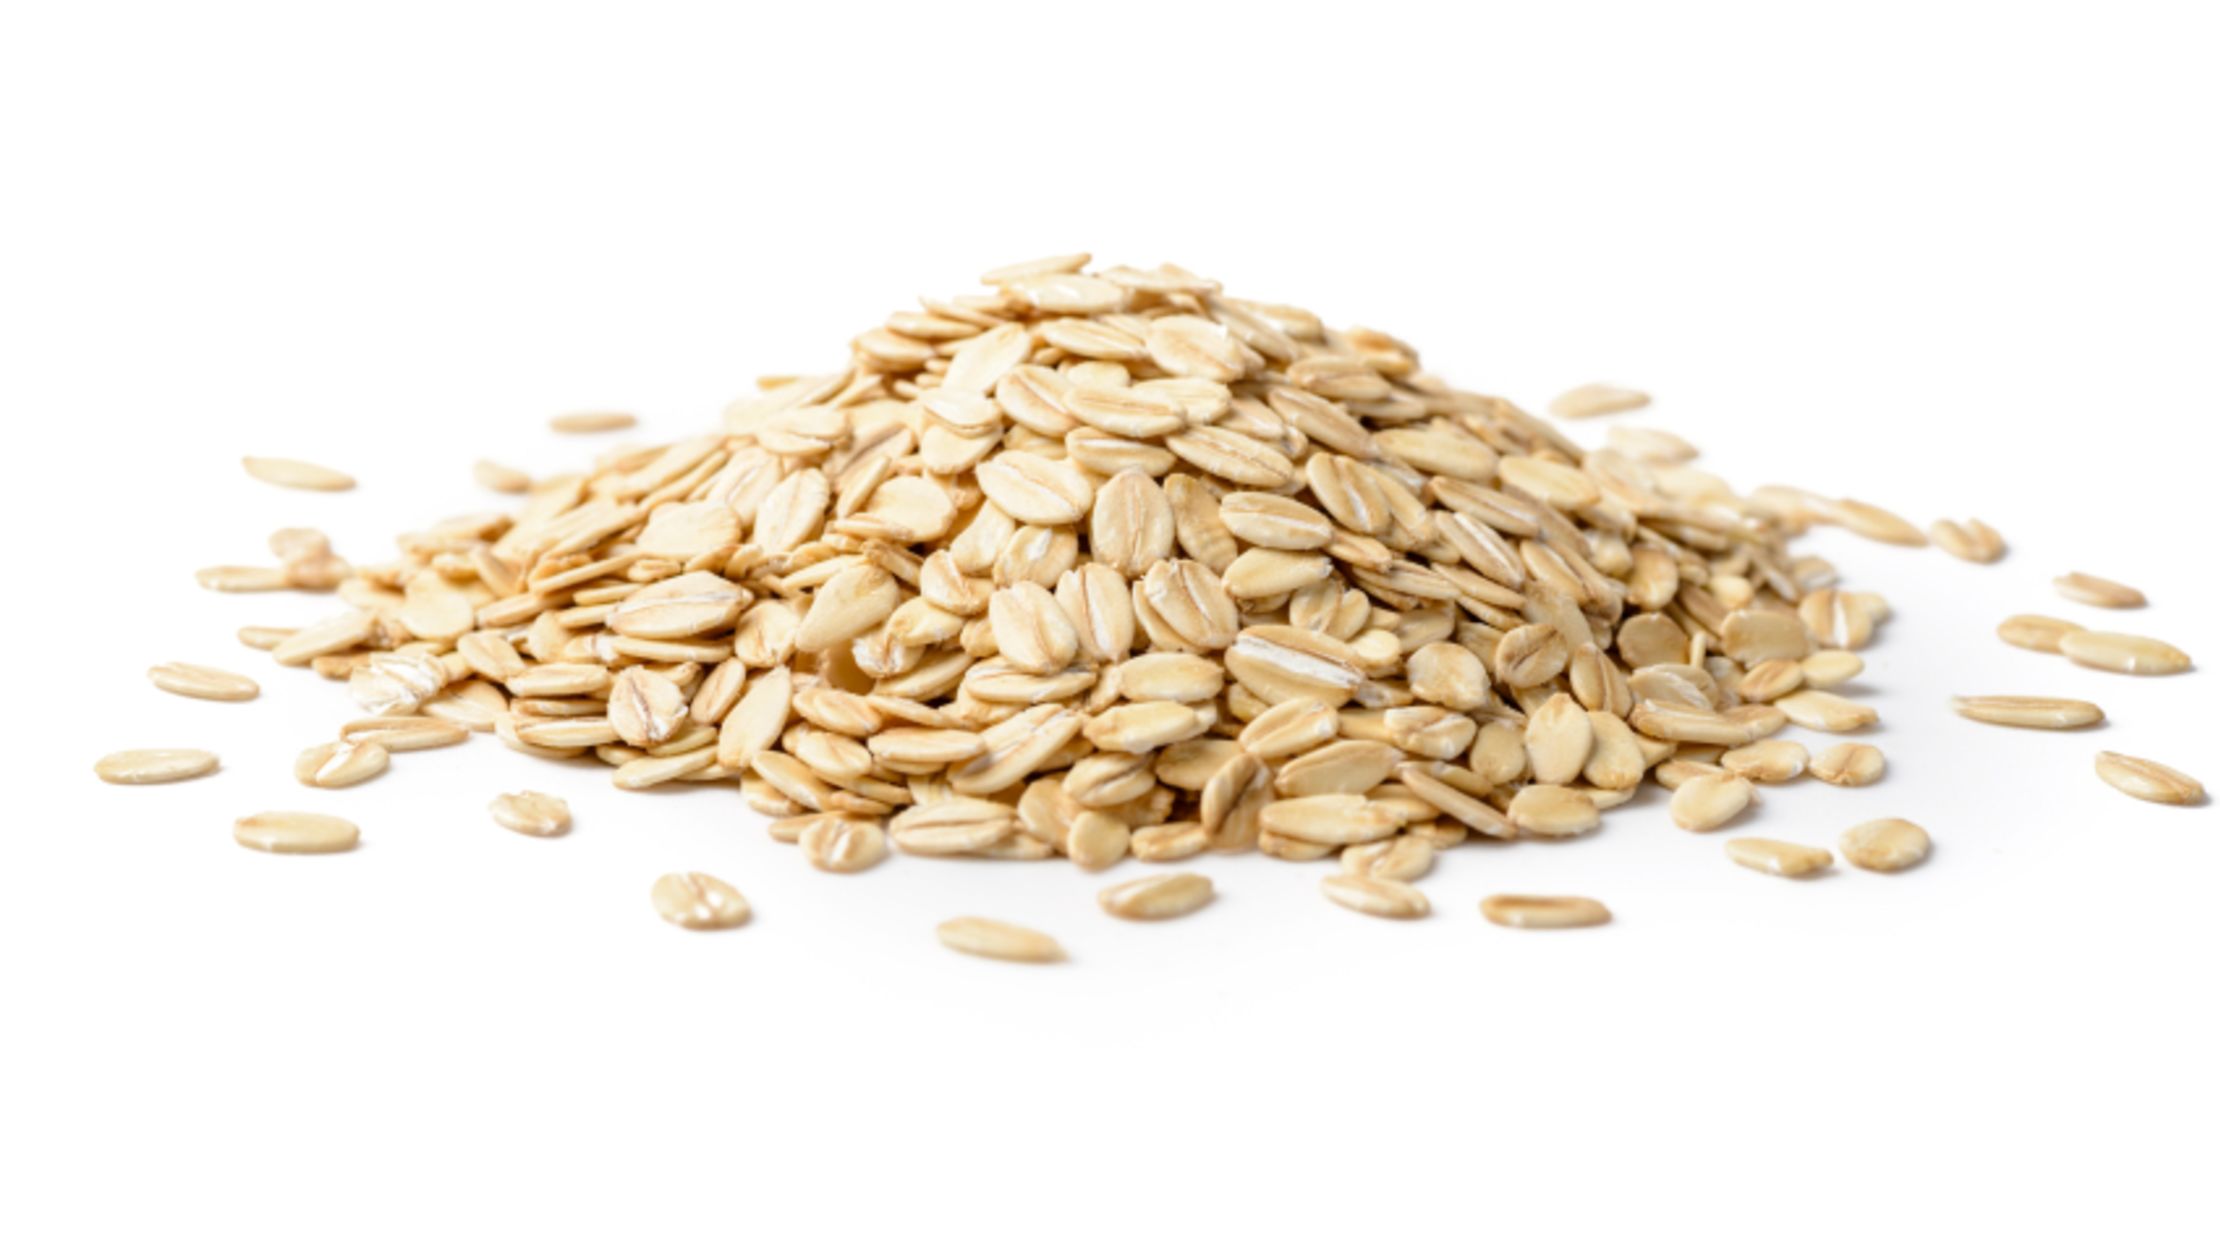 Can You Name the One-Syllable Words That Rhyme With 'Oat'? | Mental Floss